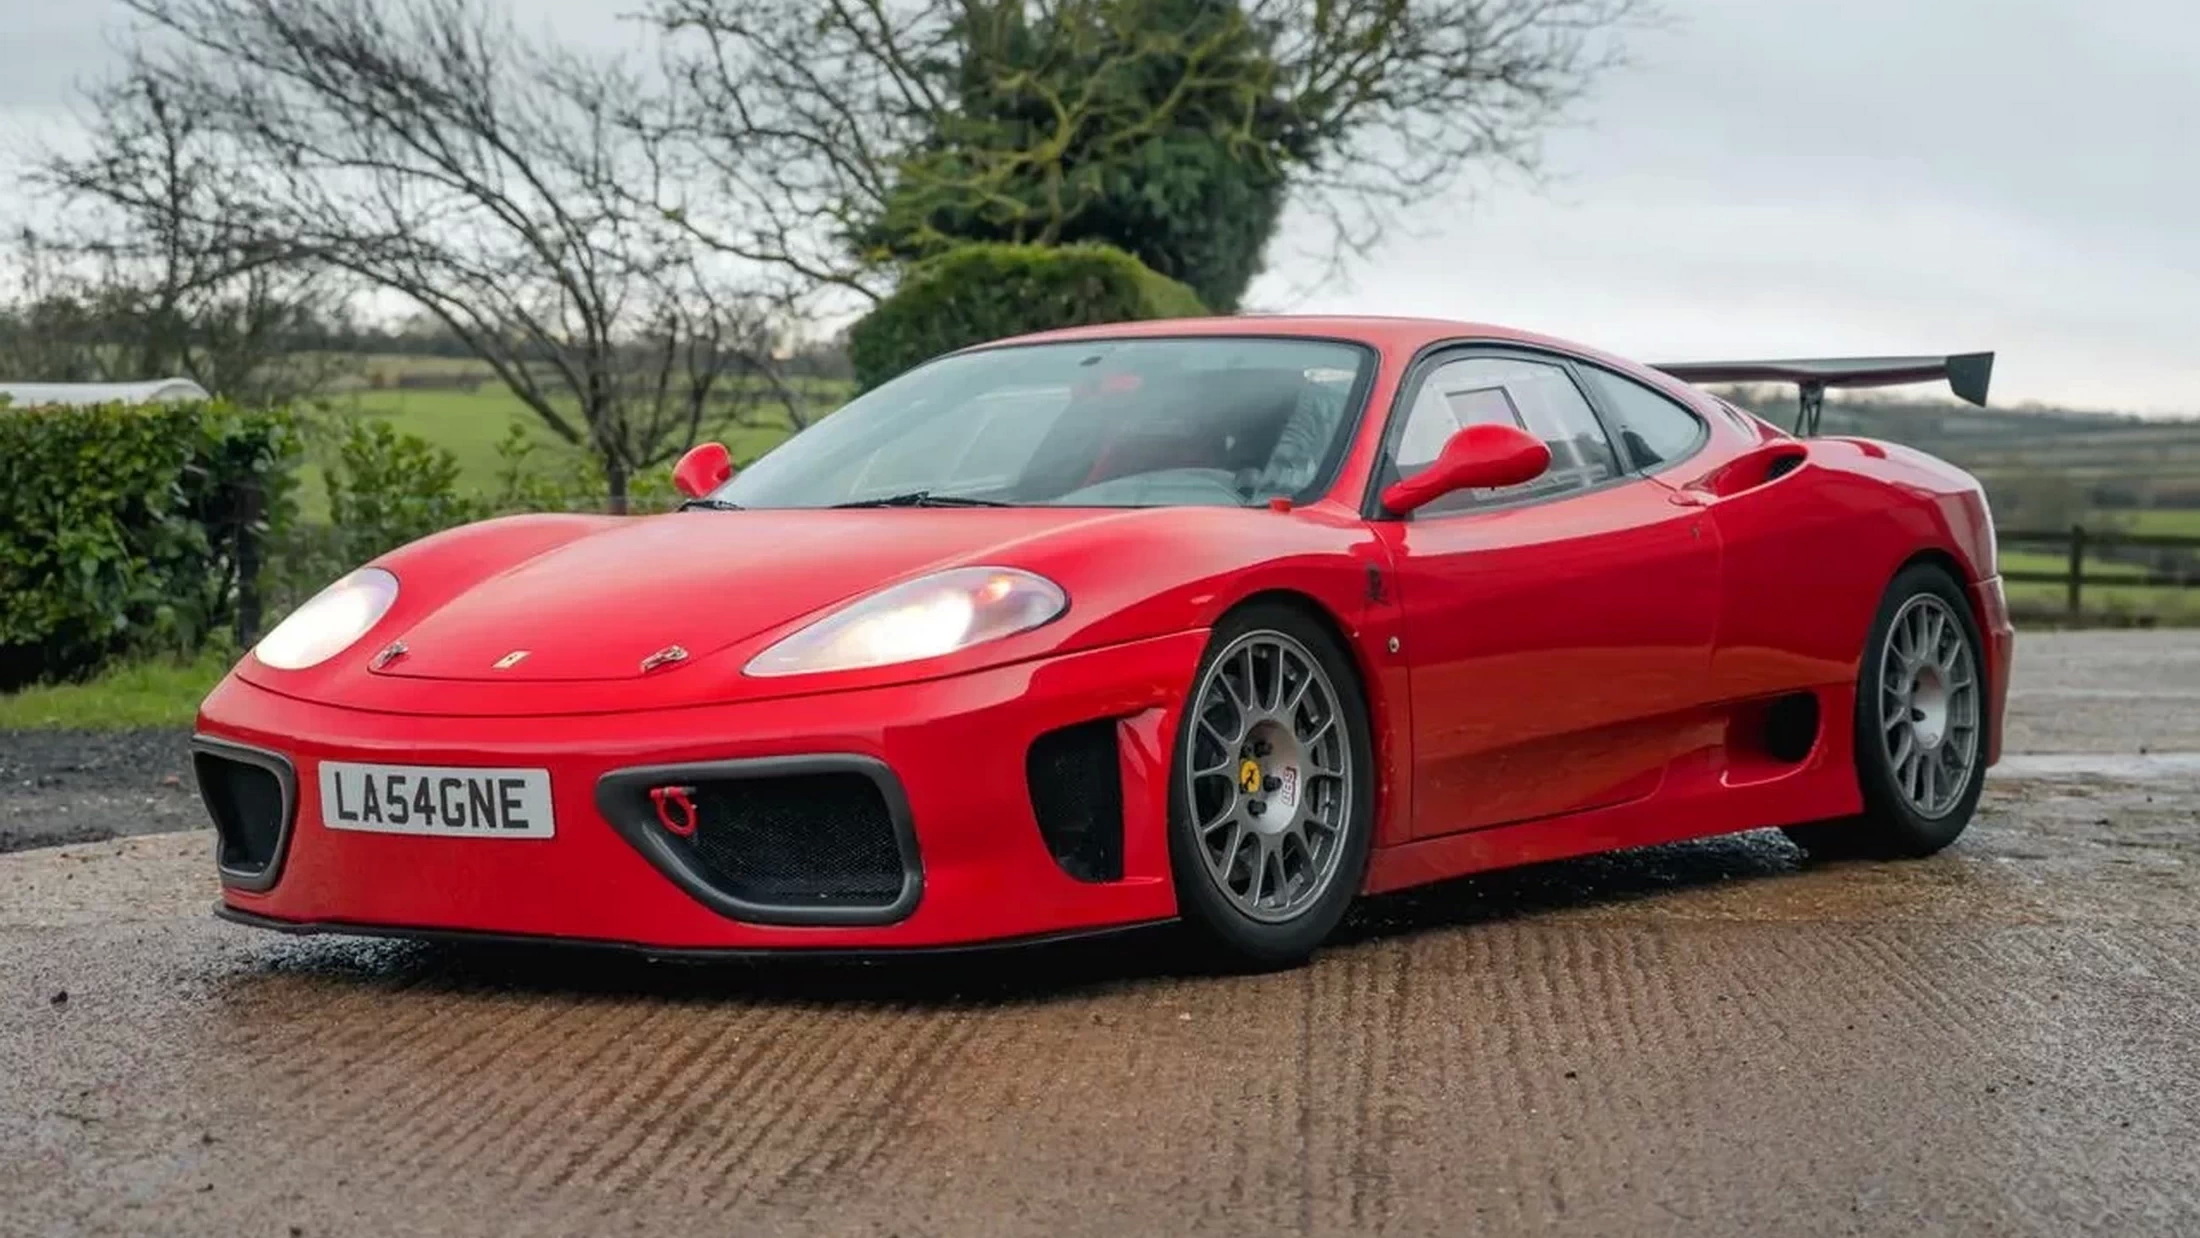 Want A Real Racecar For The Road? This Street-Legal Ferrari 360 Challenge Modena Is For You